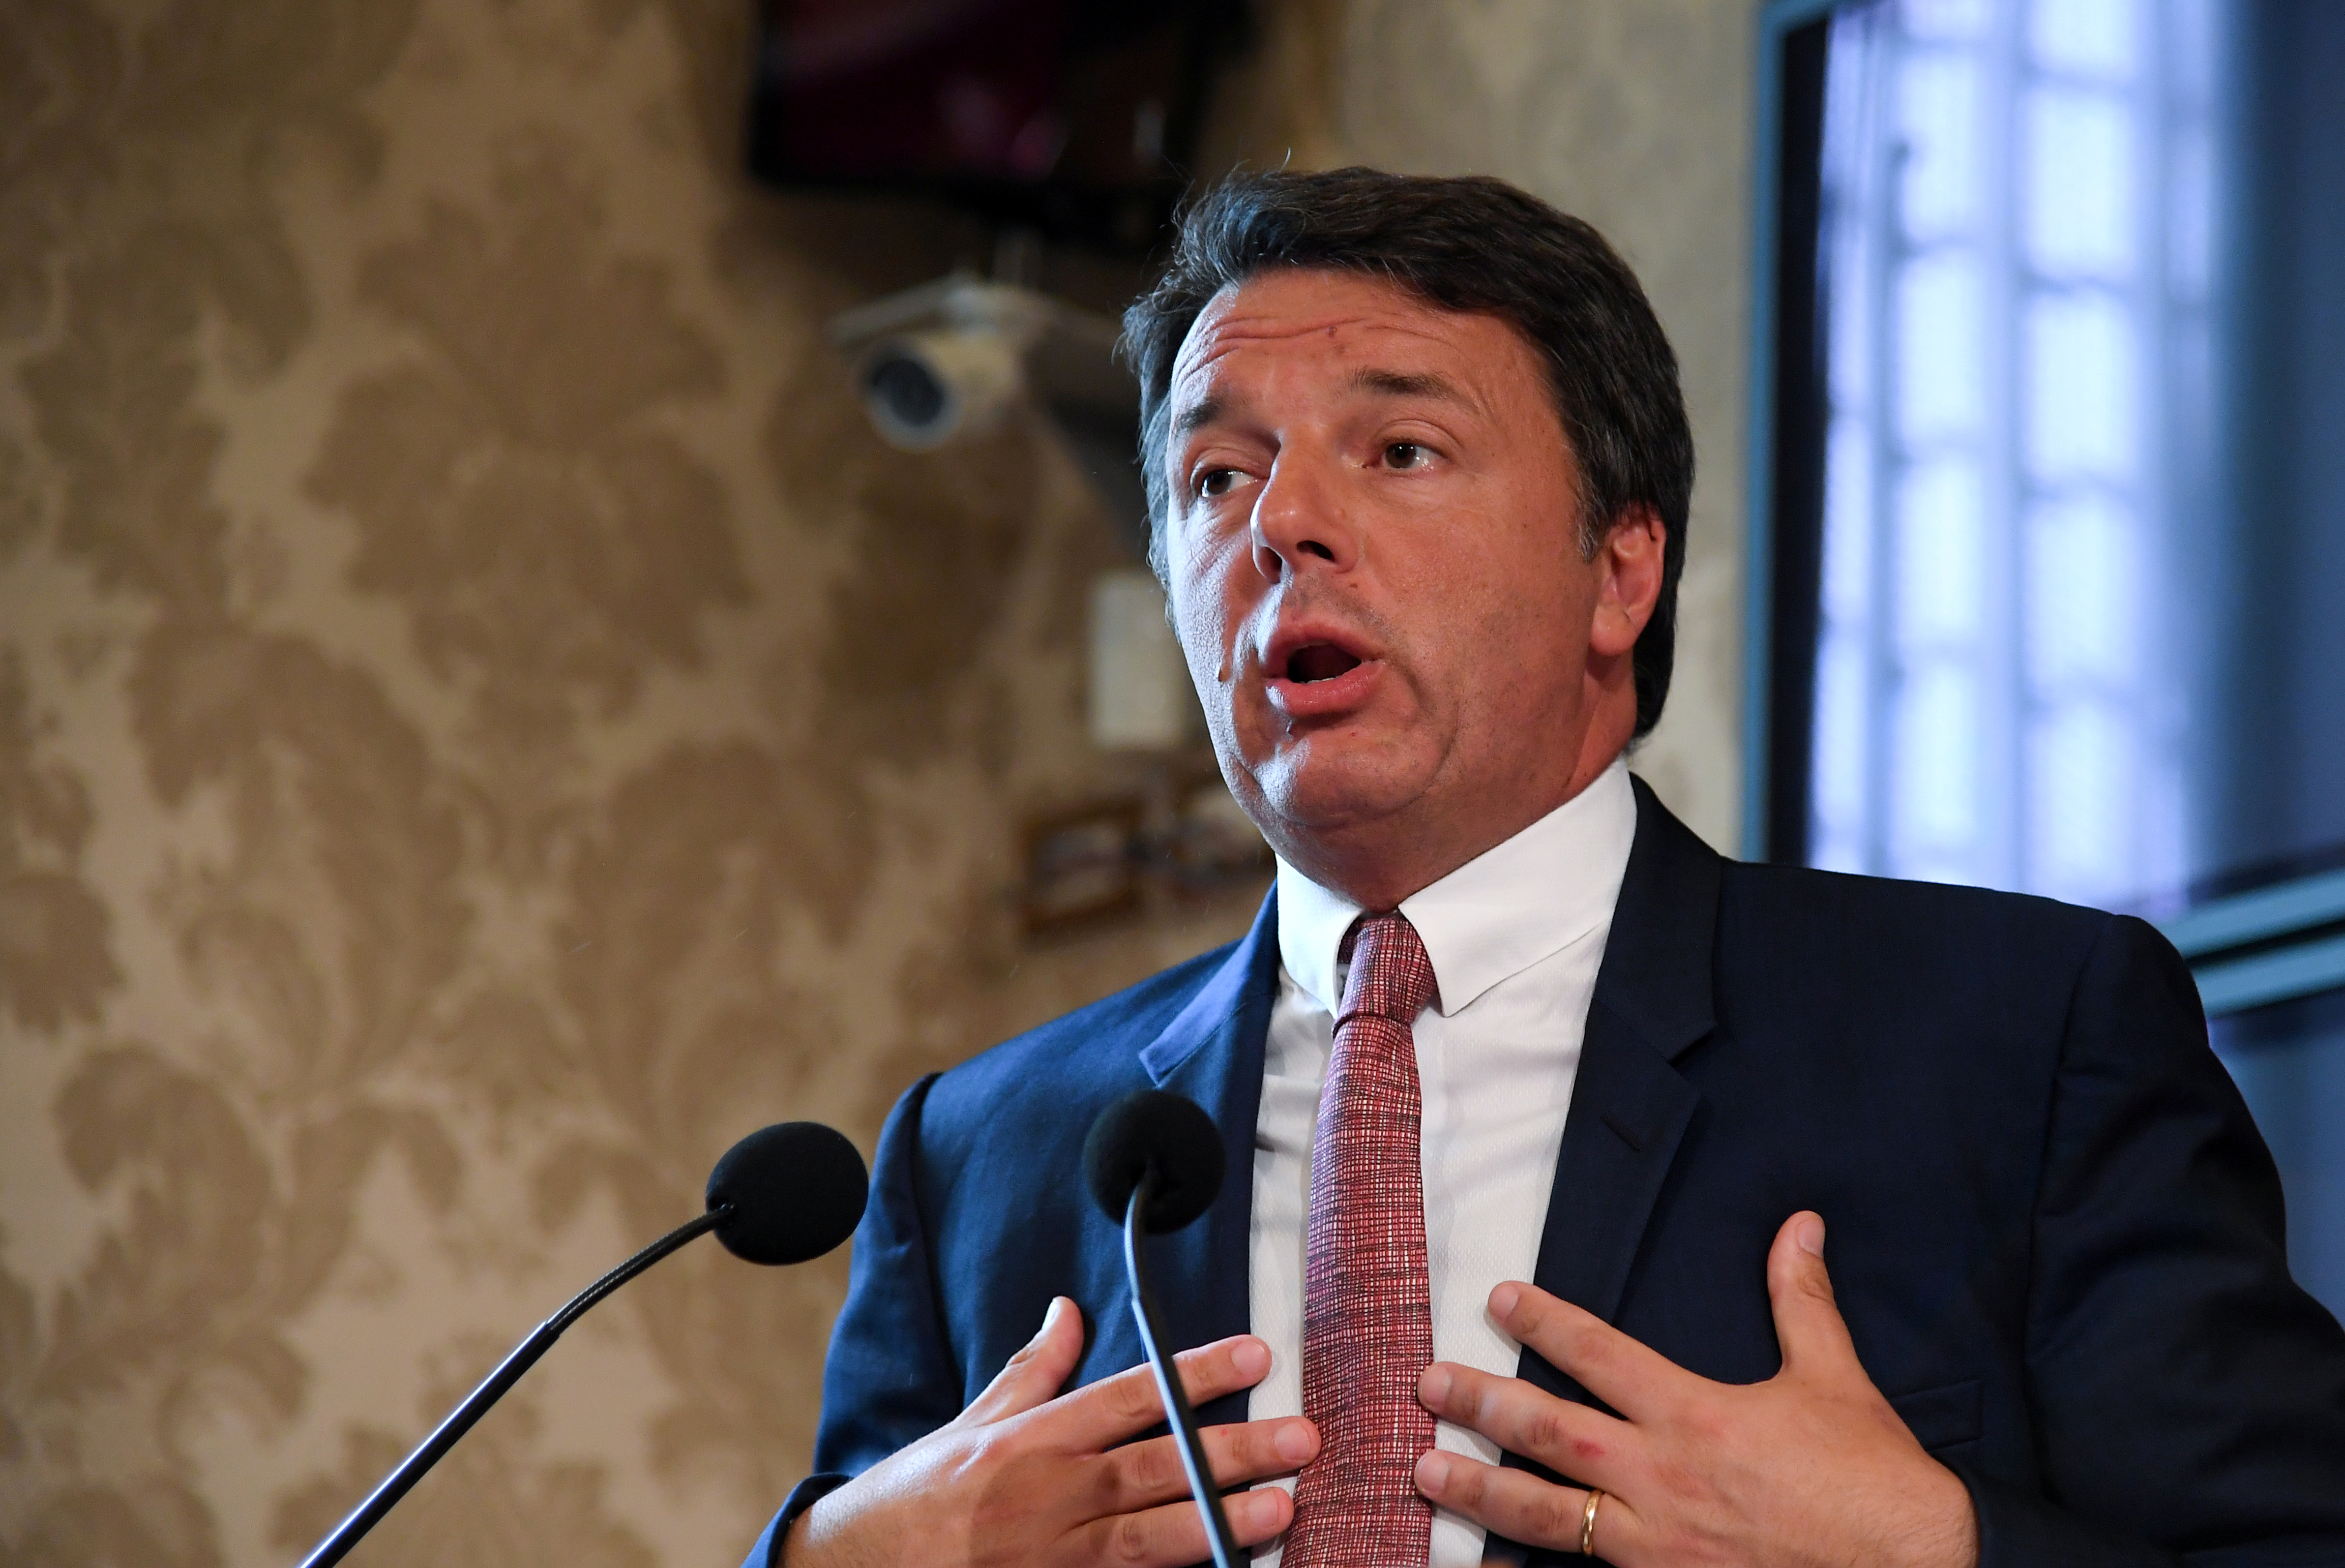 Former Italian Prime Minister Matteo Renzi speaks at a news conference regarding his proposal for a transitional Italian government in Rome, Italy, August 13, 2019. REUTERS/Alberto Lingria/File Photo